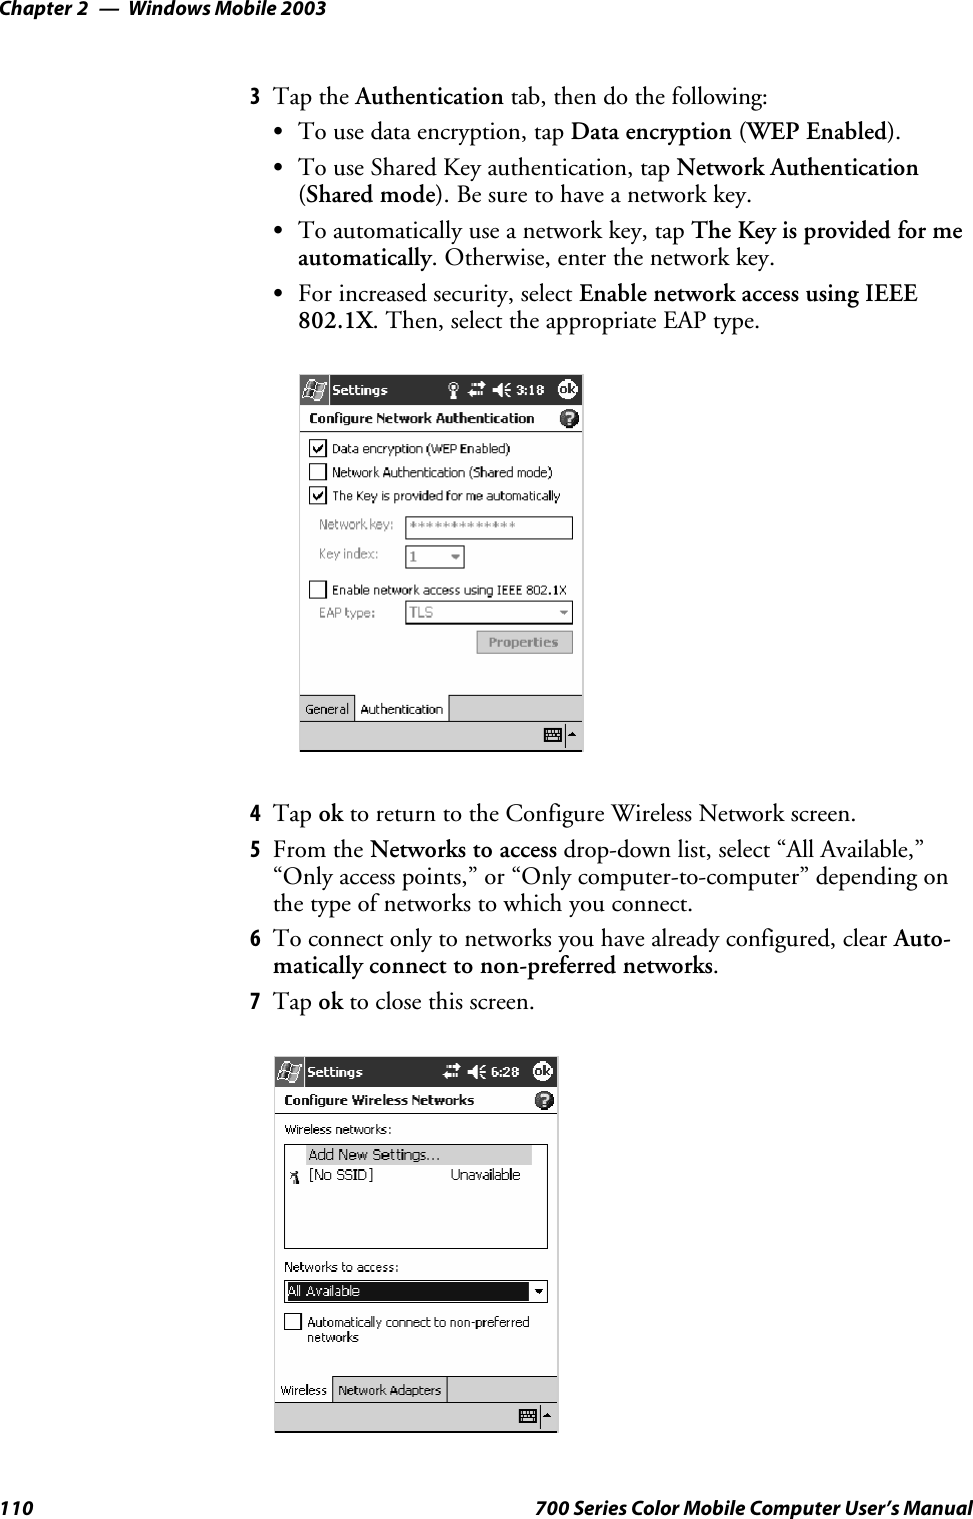 Windows Mobile 2003Chapter —2110 700 Series Color Mobile Computer User’s Manual3Tap the Authentication tab, then do the following:STo use data encryption, tap Data encryption (WEP Enabled).STo use Shared Key authentication, tap Network Authentication(Shared mode).Besuretohaveanetworkkey.STo automatically use a network key, tap The Key is provided for meautomatically. Otherwise, enter the network key.SFor increased security, select Enable network access using IEEE802.1X. Then, select the appropriate EAP type.4Tap ok to return to the Configure Wireless Network screen.5From the Networks to access drop-down list, select “All Available,”“Only access points,” or “Only computer-to-computer” depending onthetypeofnetworkstowhichyouconnect.6To connect only to networks you have already configured, clear Auto-matically connect to non-preferred networks.7Tap ok to close this screen.